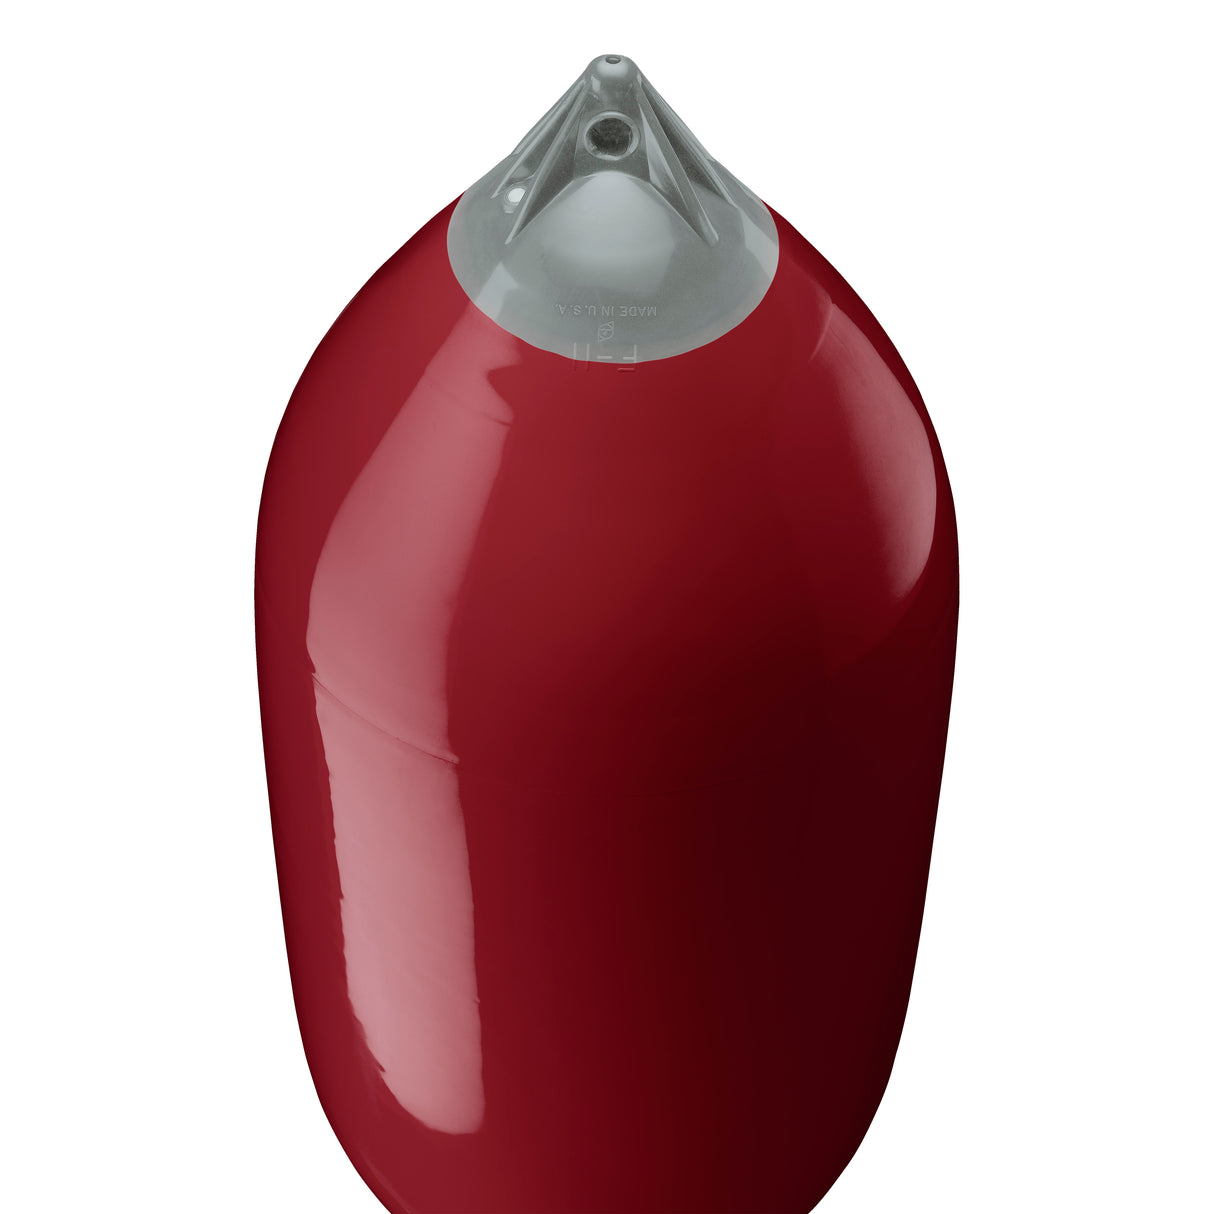 Burgundy boat fender with Grey-Top, Polyform F-11 angled shot